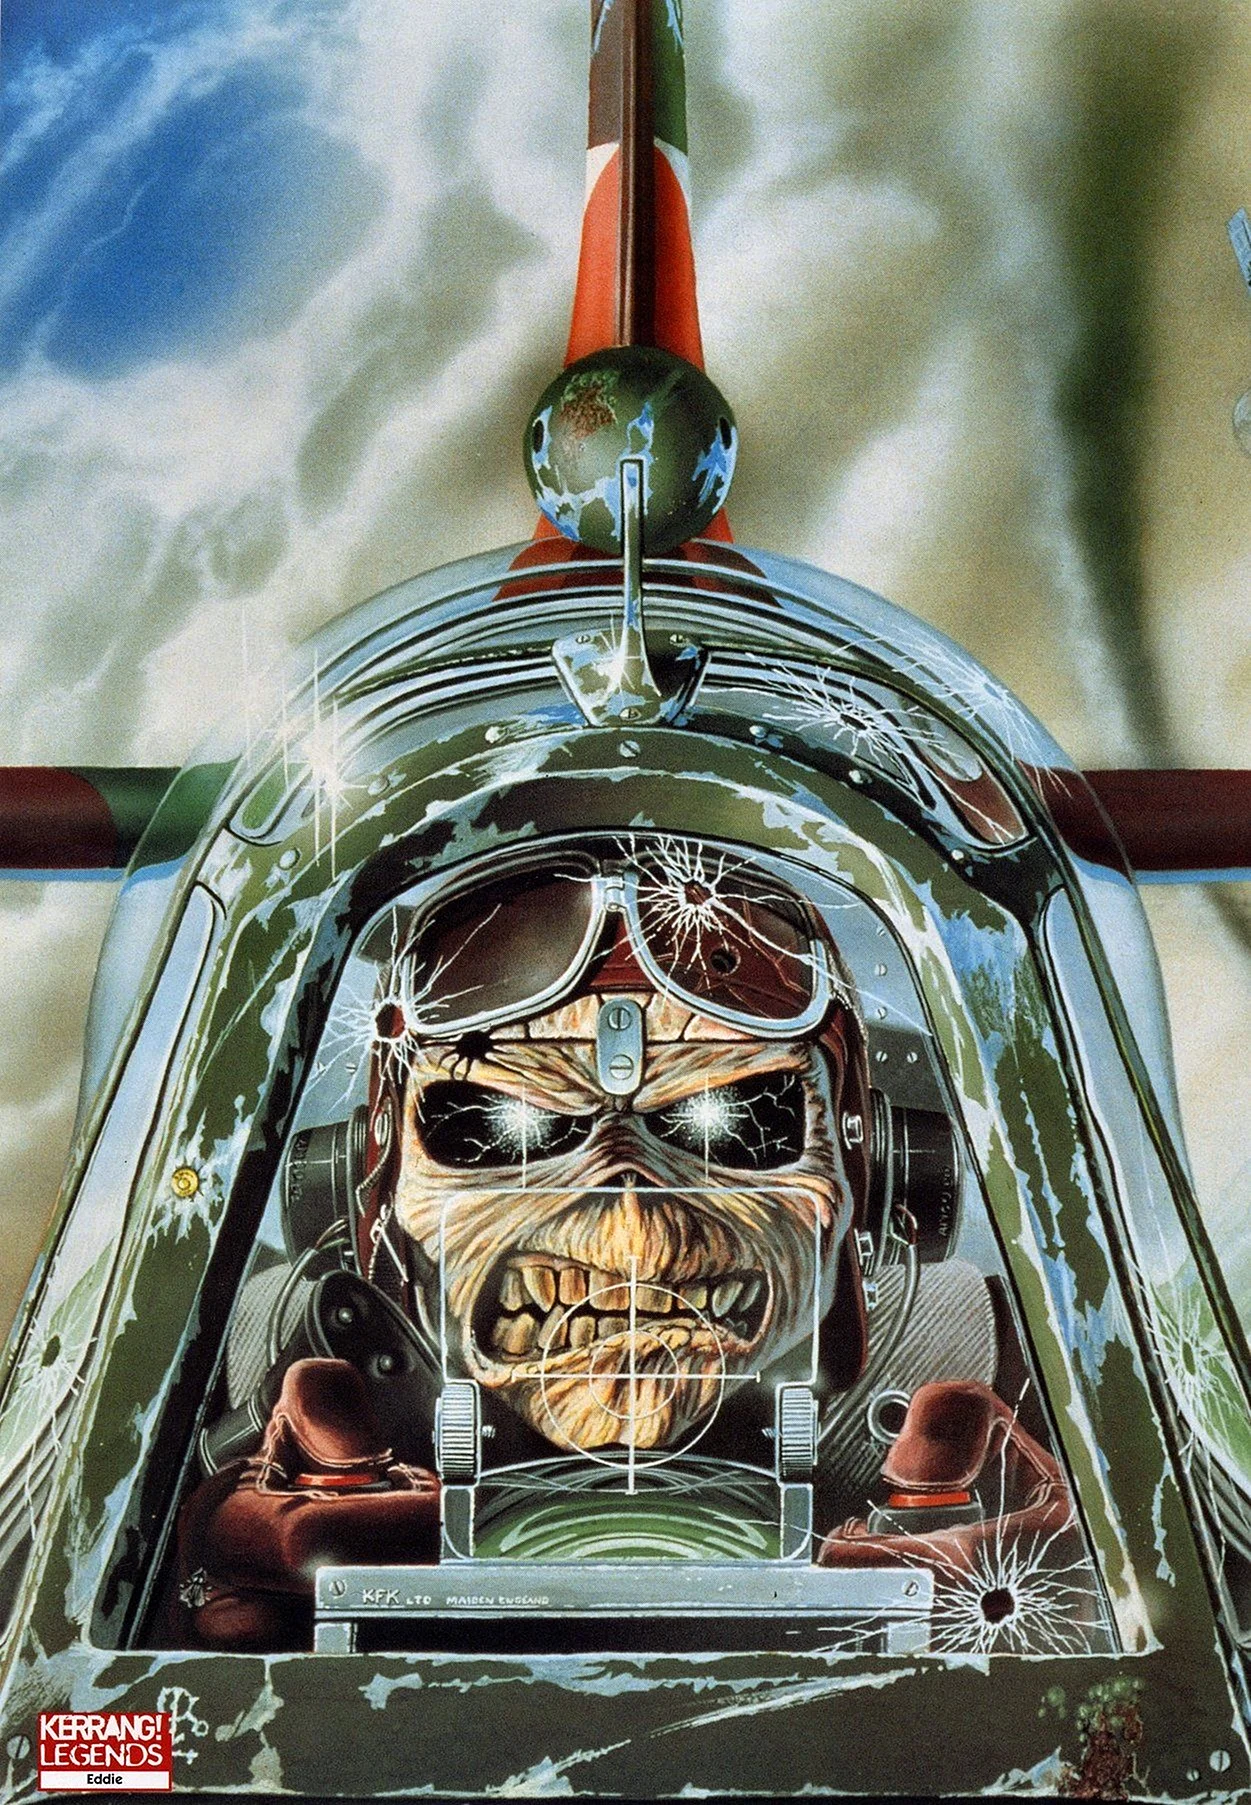 Iron Maiden Wallpaper For iPhone